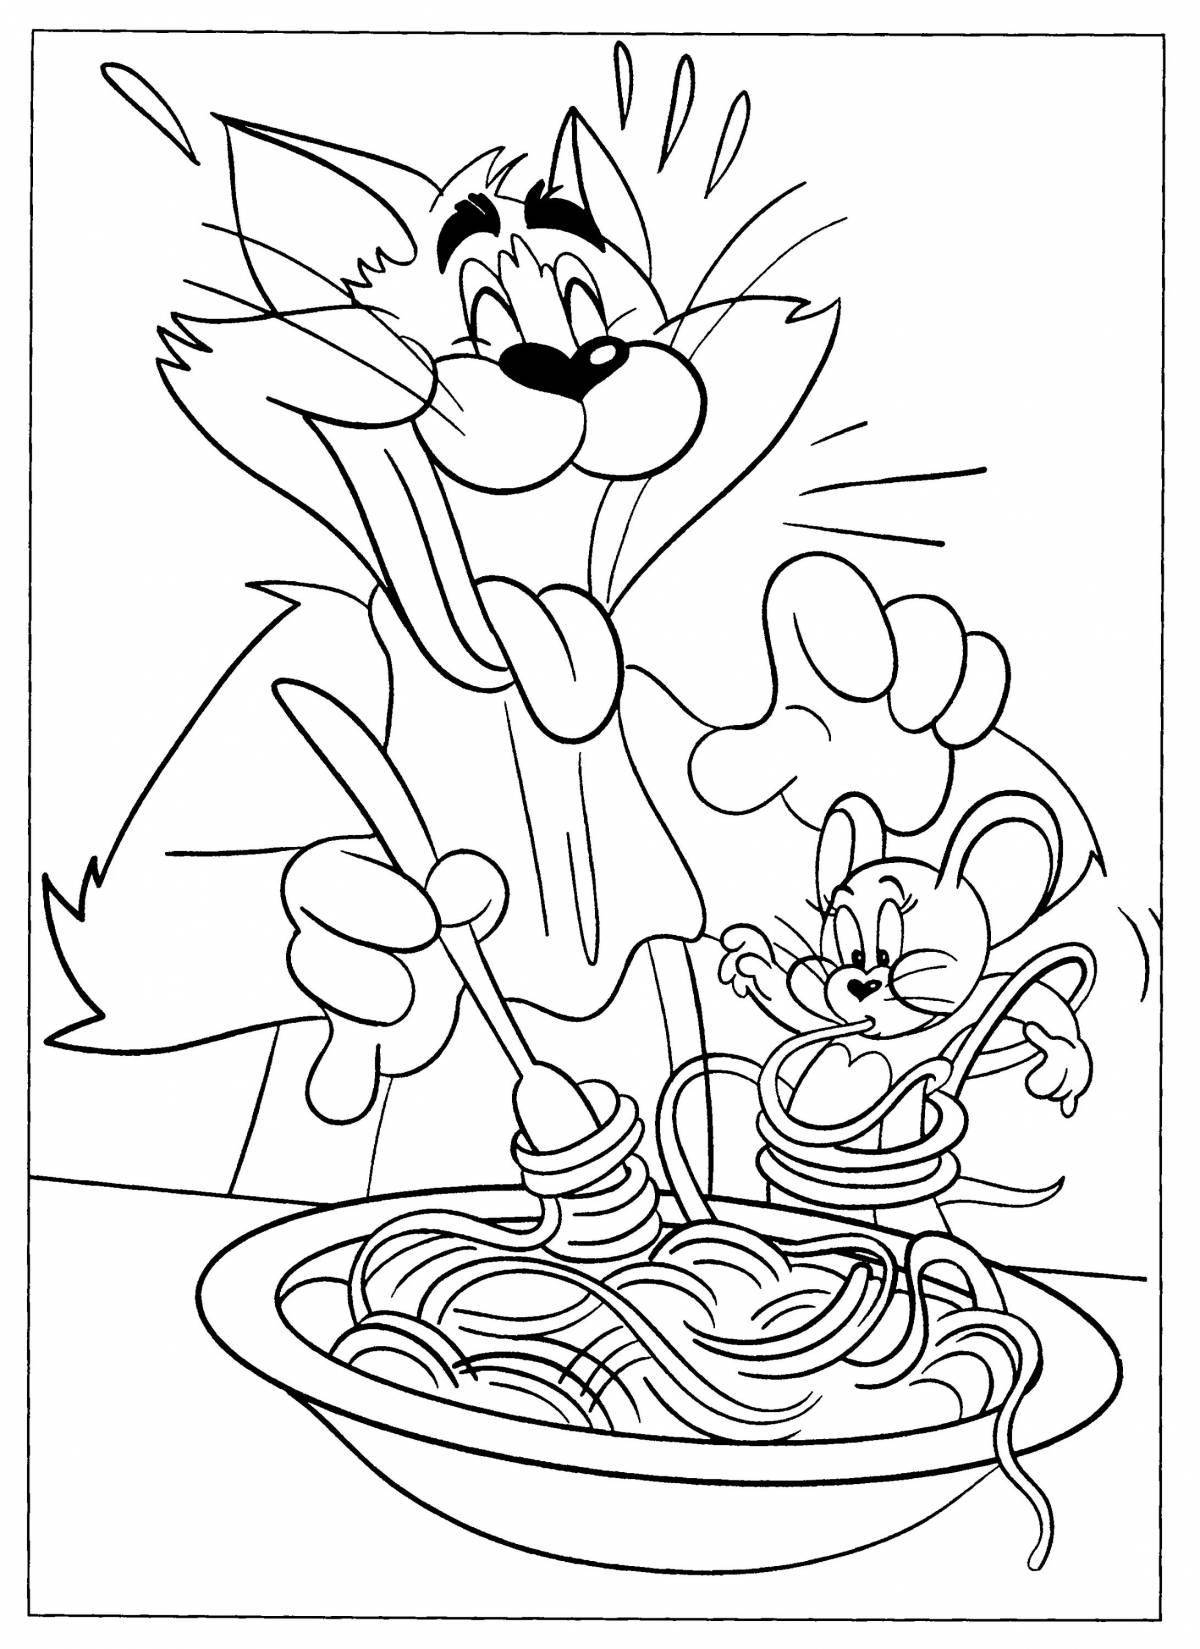 Impressive tom and jerry coloring book